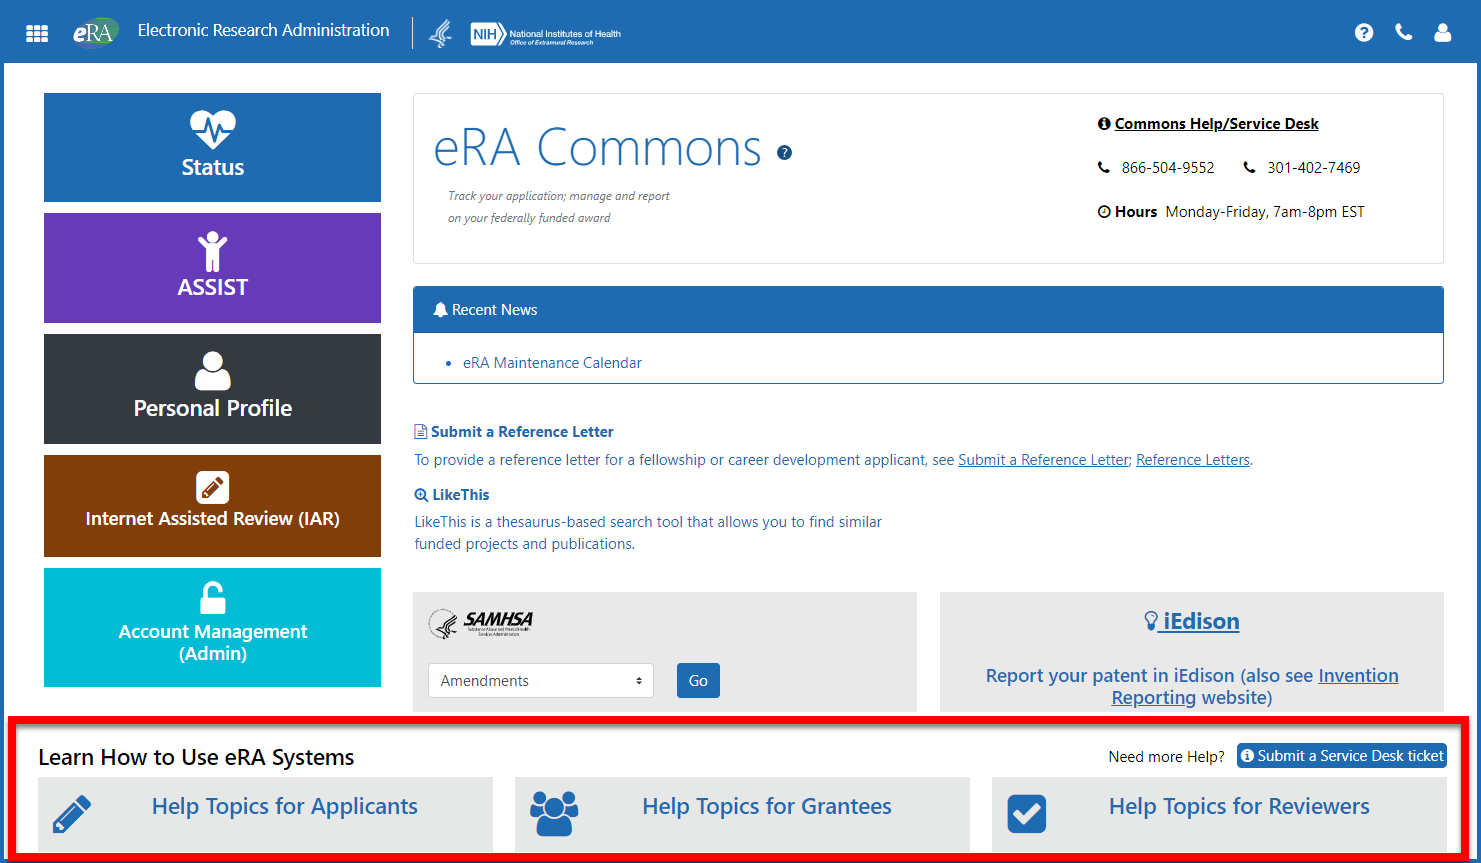 The eRA Commons landing screen highlighting the redesigned navigation buttons to access content specific informational web pages